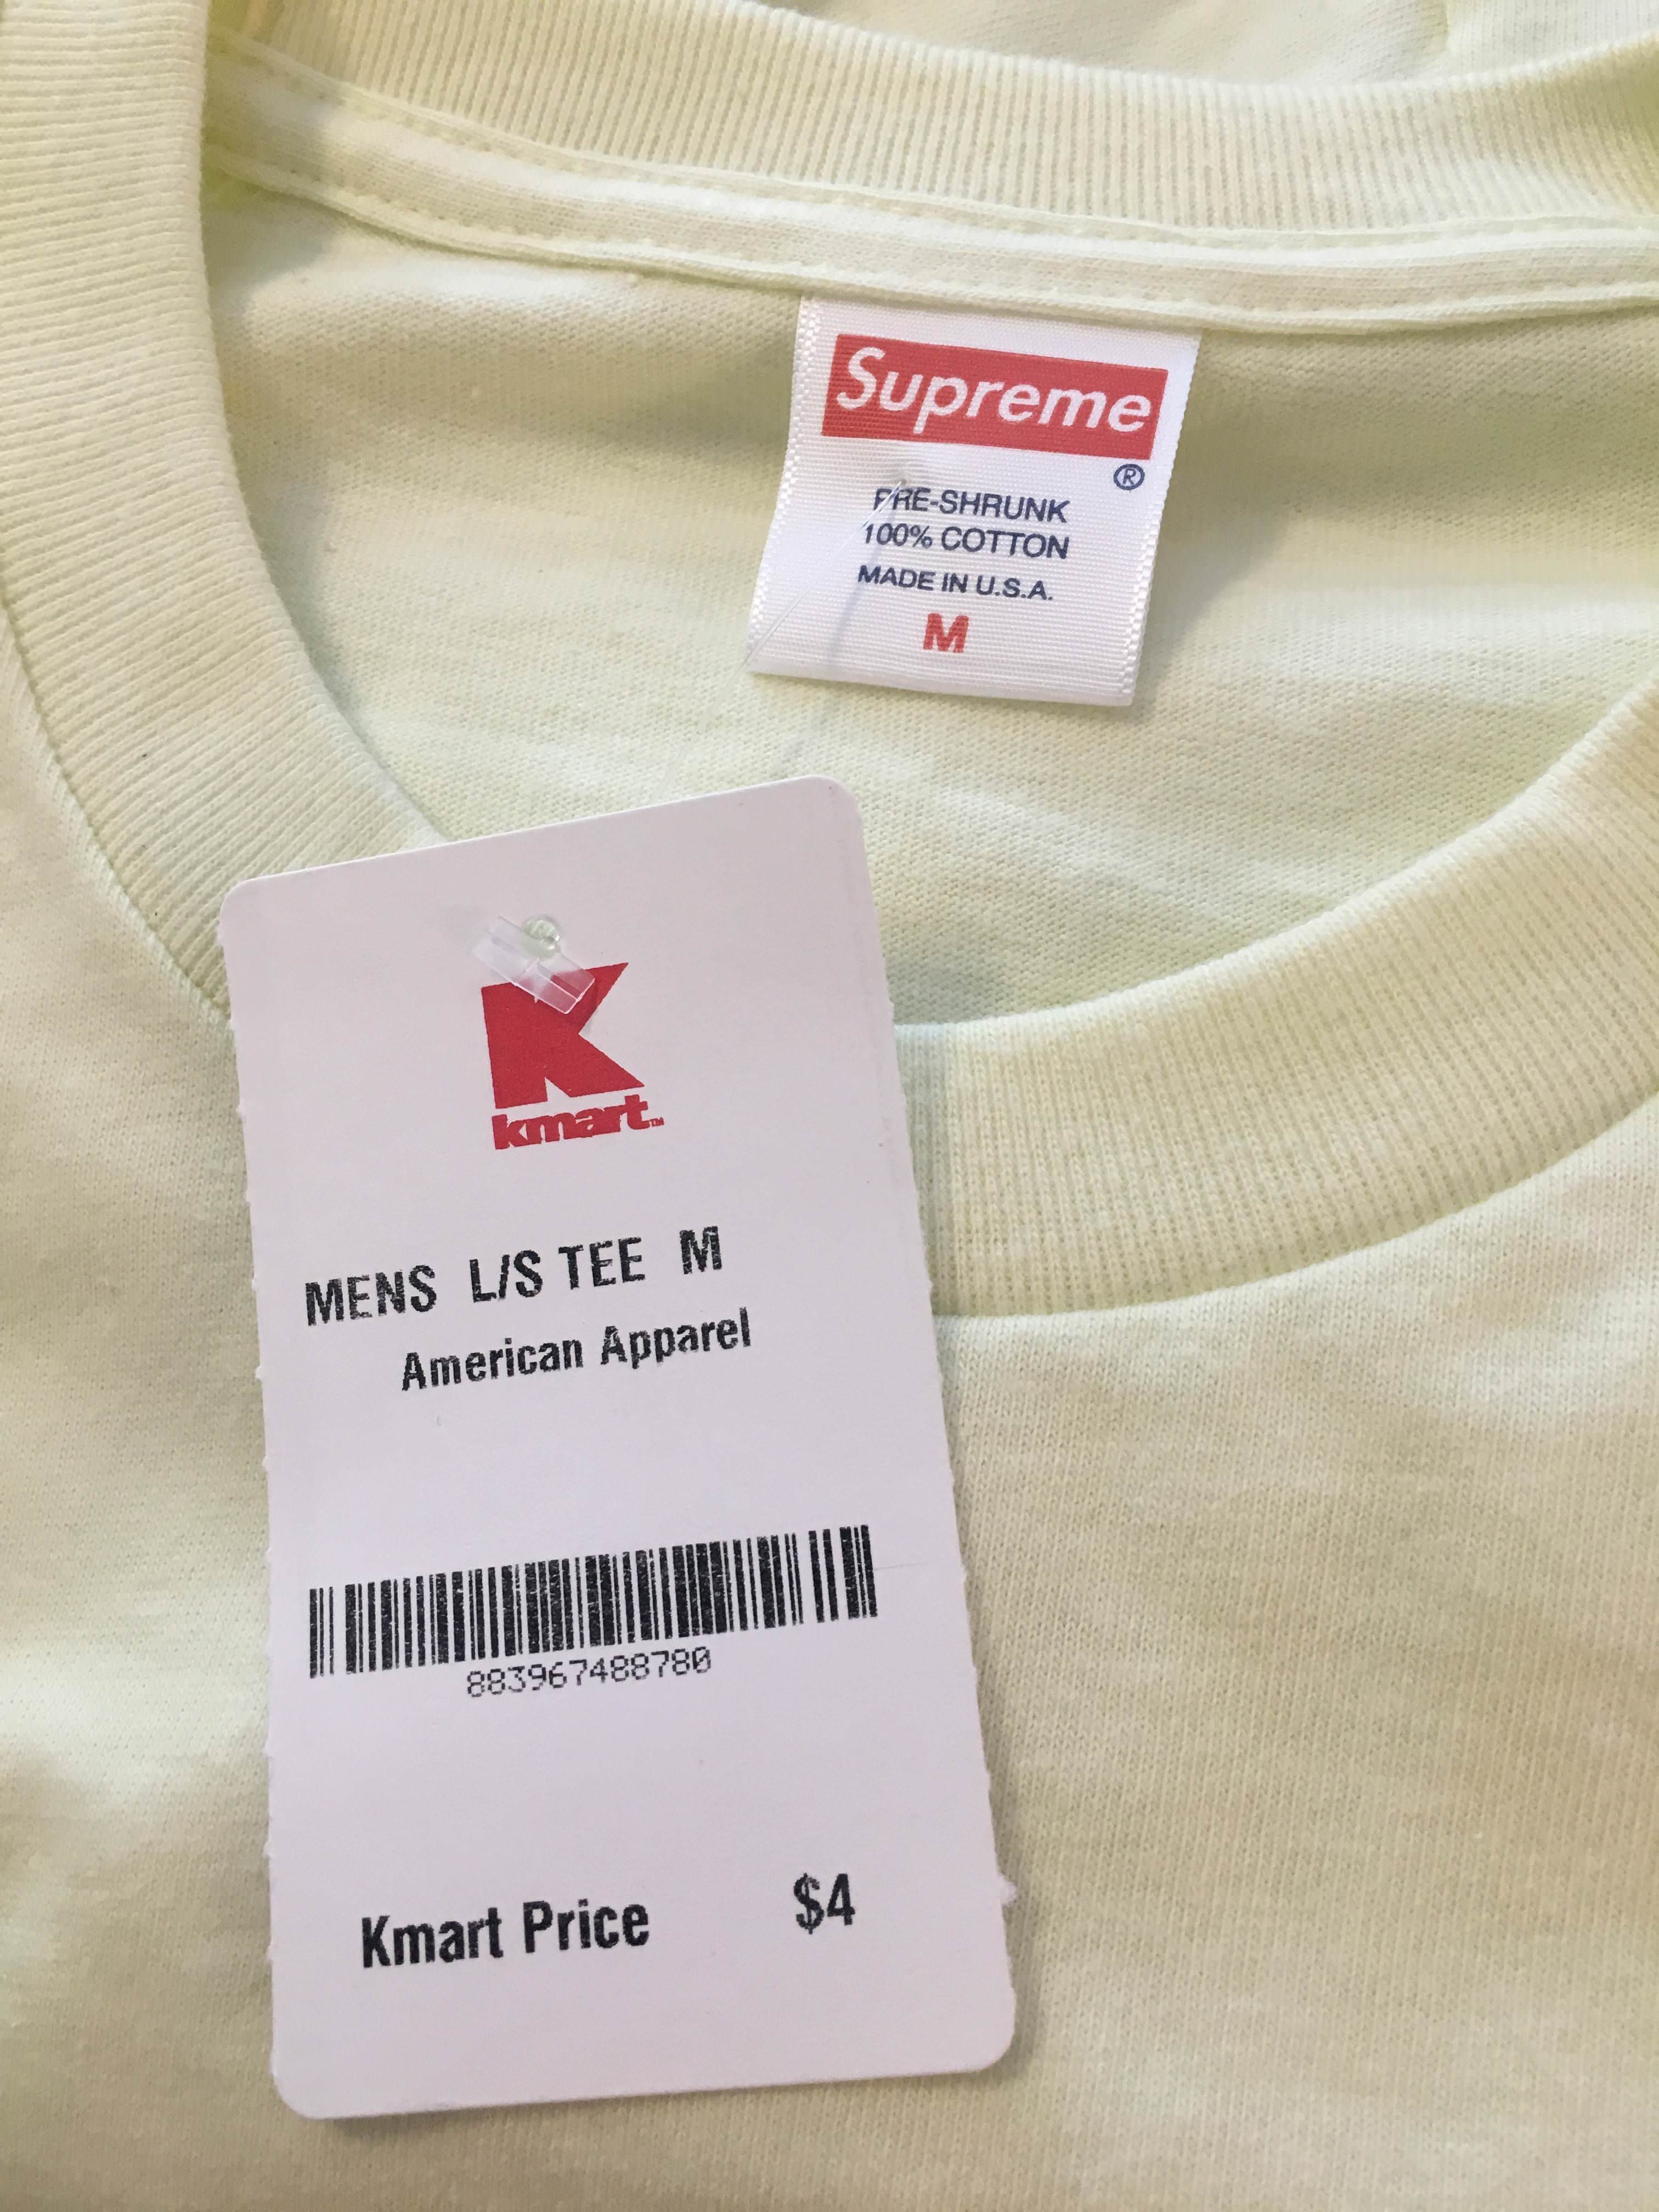 Supreme T-Shirts Pop Up at Kmart for $4 | Complex